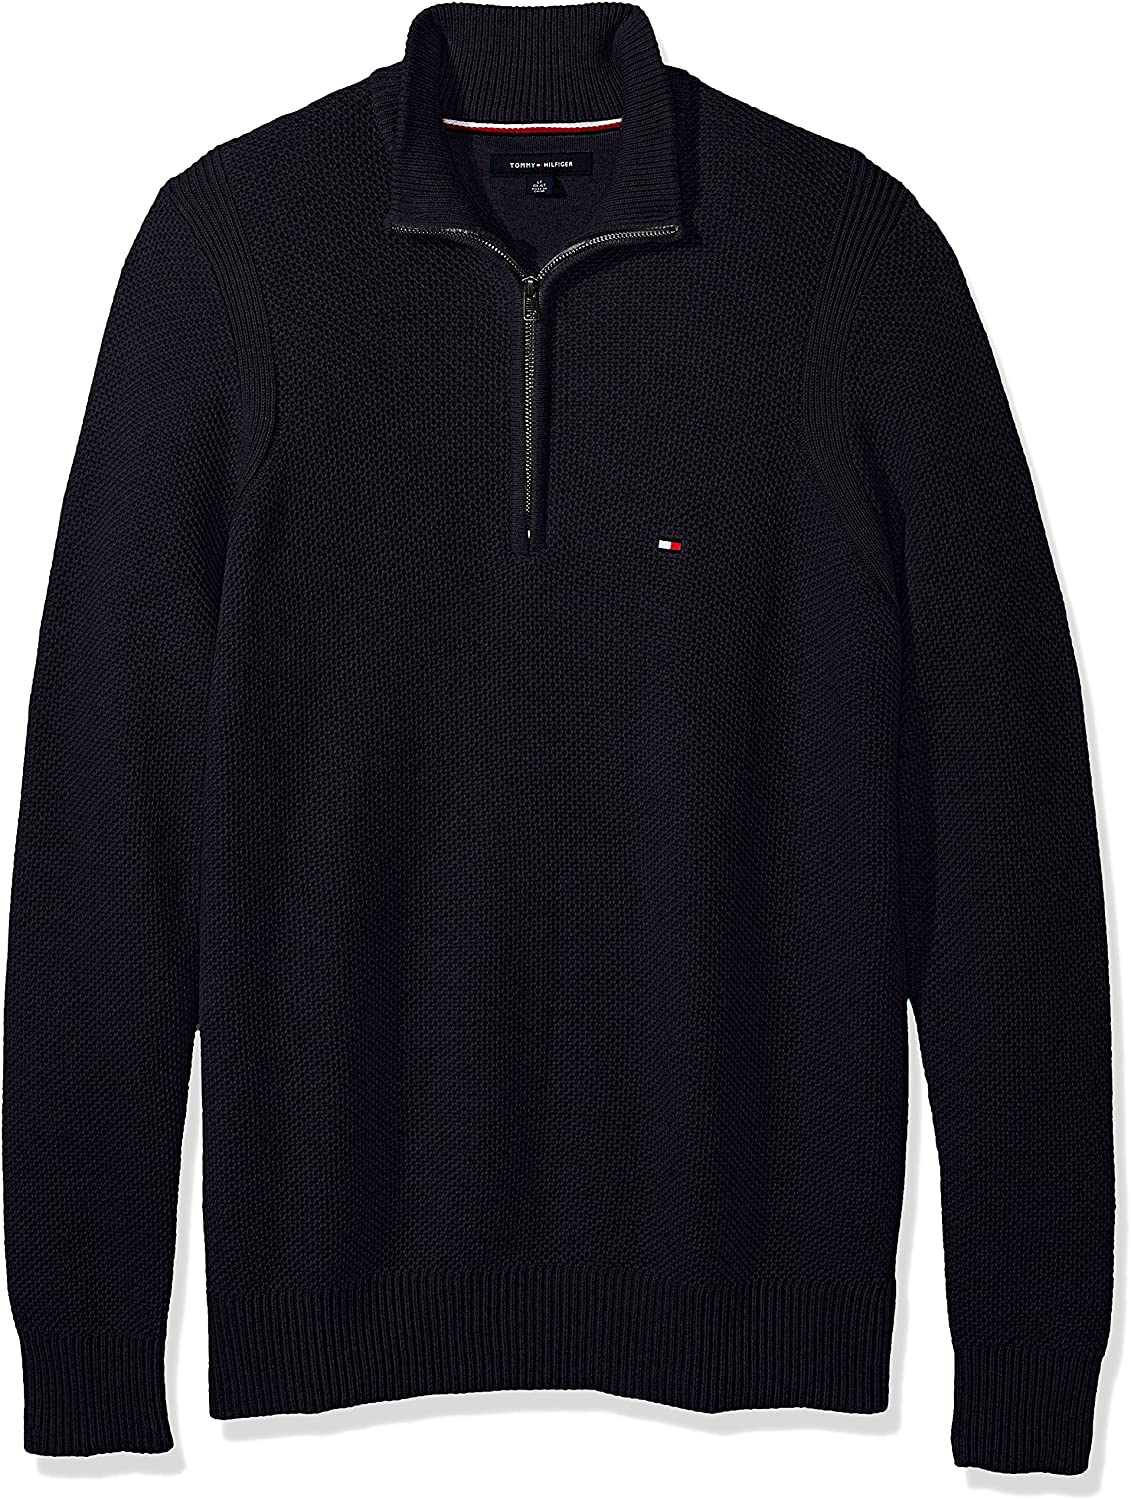 NWT Tommy Hilfiger Men's 1/4 Zip Pullover Sweater Navy